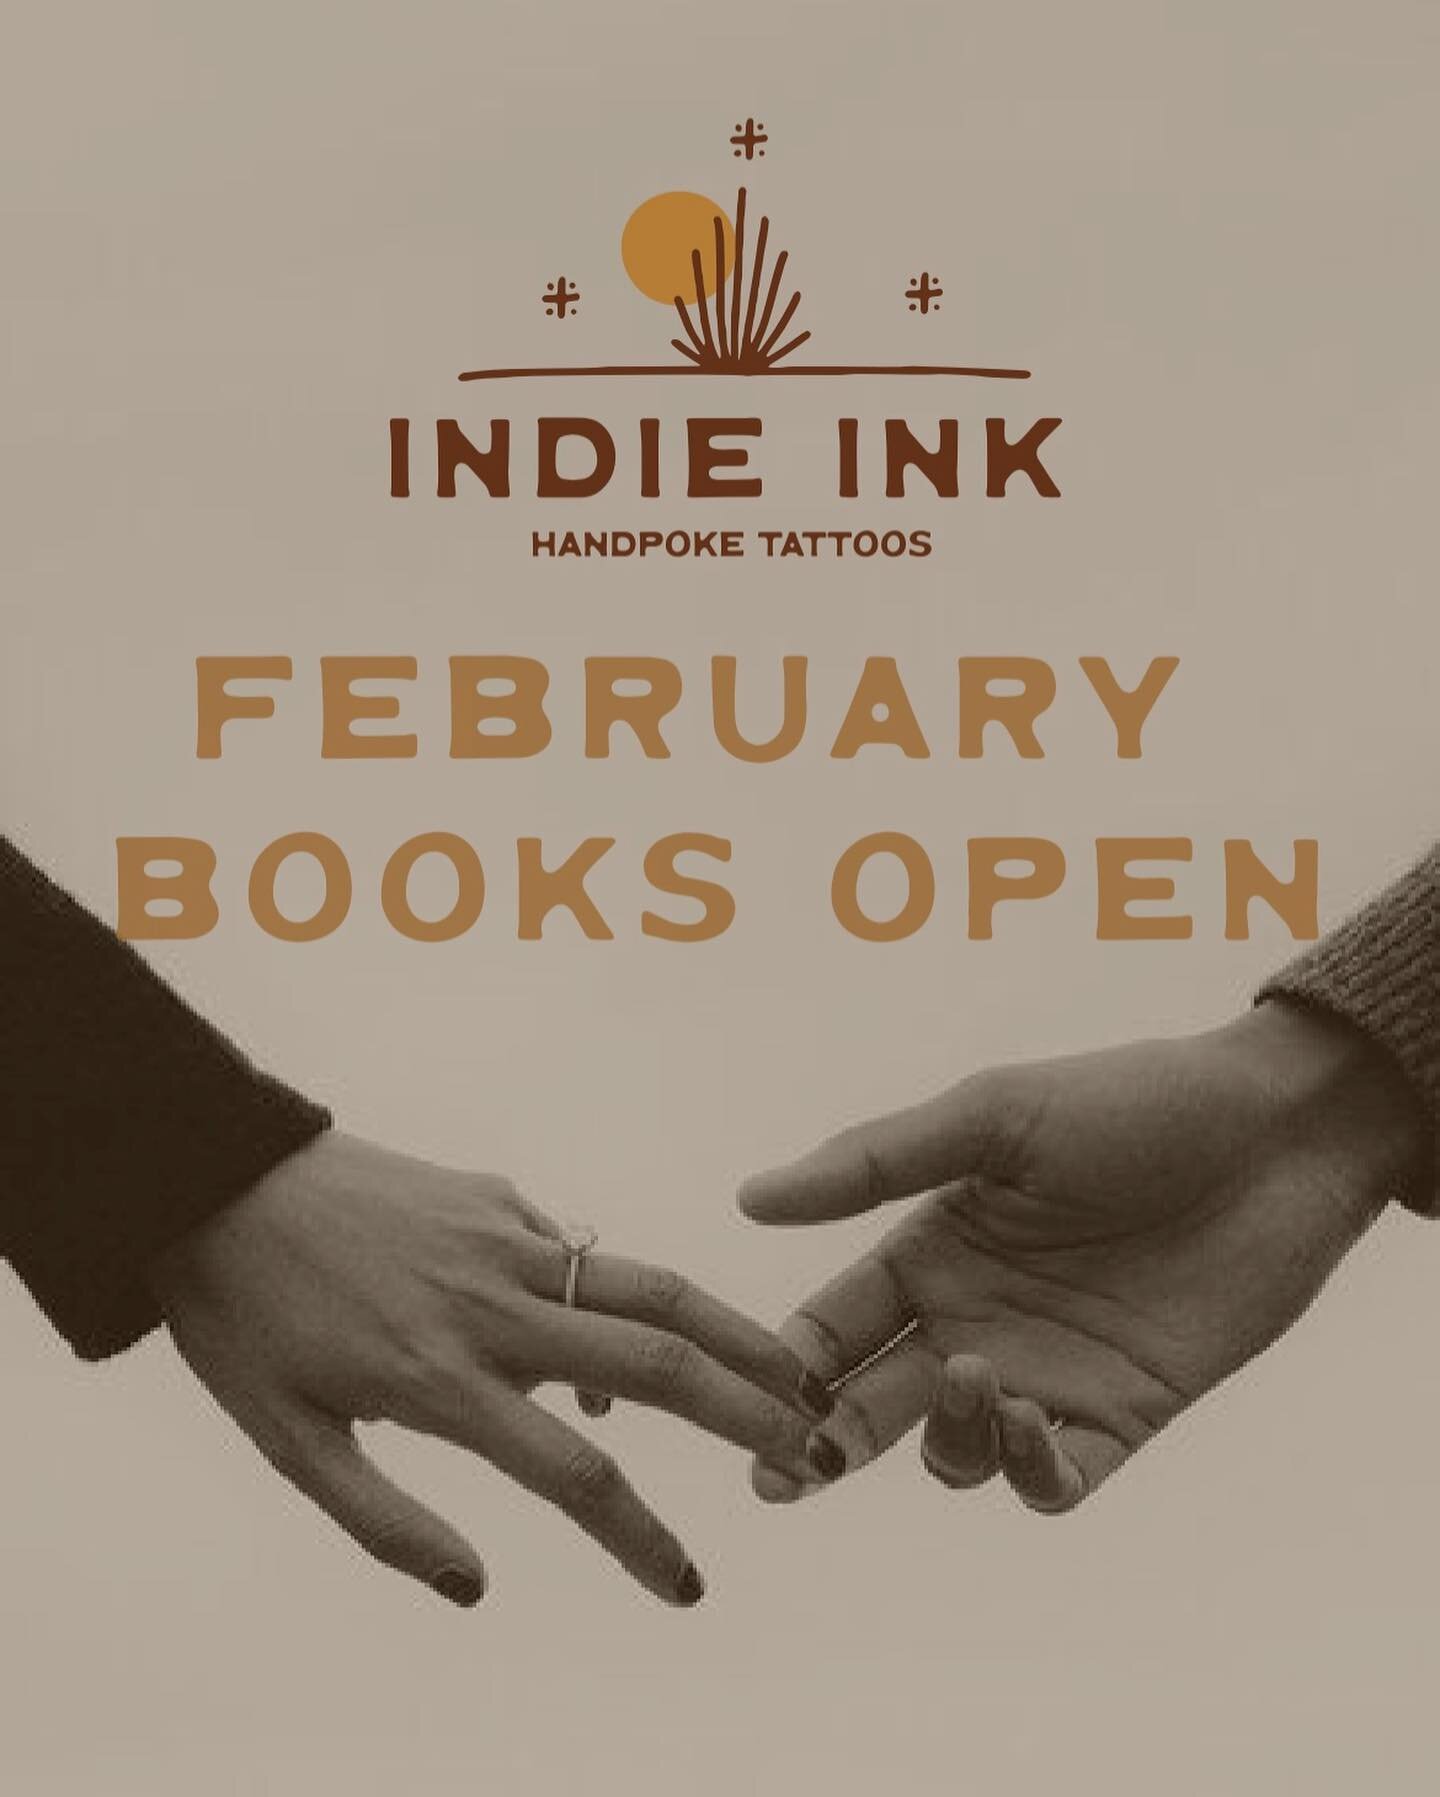 ⊹ FEBRUARY BOOKS ARE OPEN ⊹

@pin_and_pencil and @spicy_pokes flash books are now open. You can book through the website!